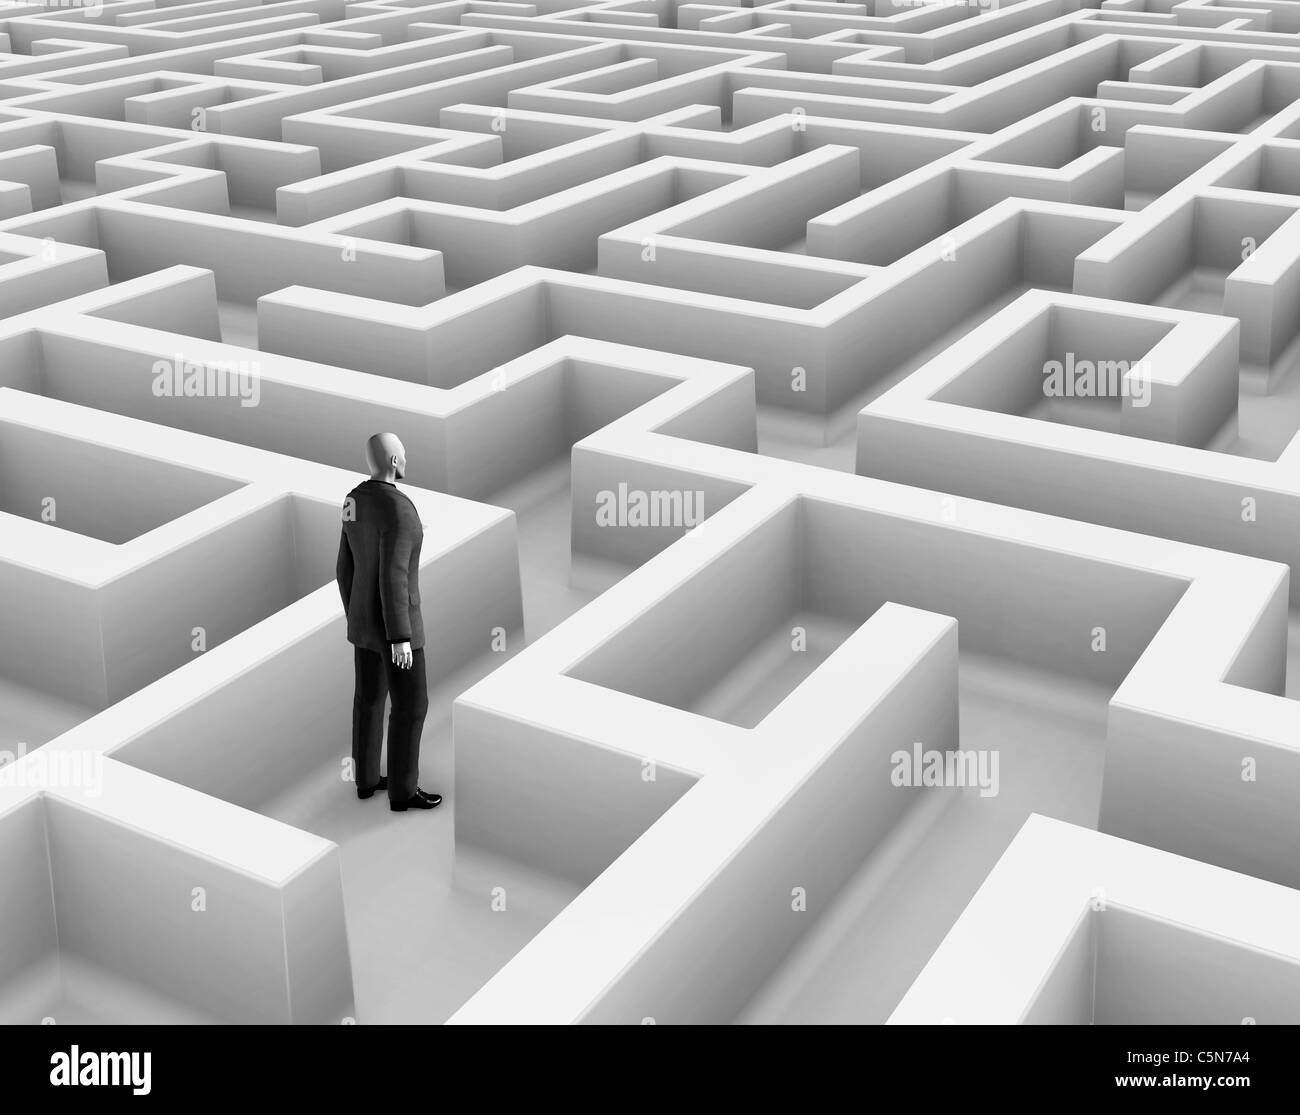 Man wearing a suit standing in maze. Stock Photo